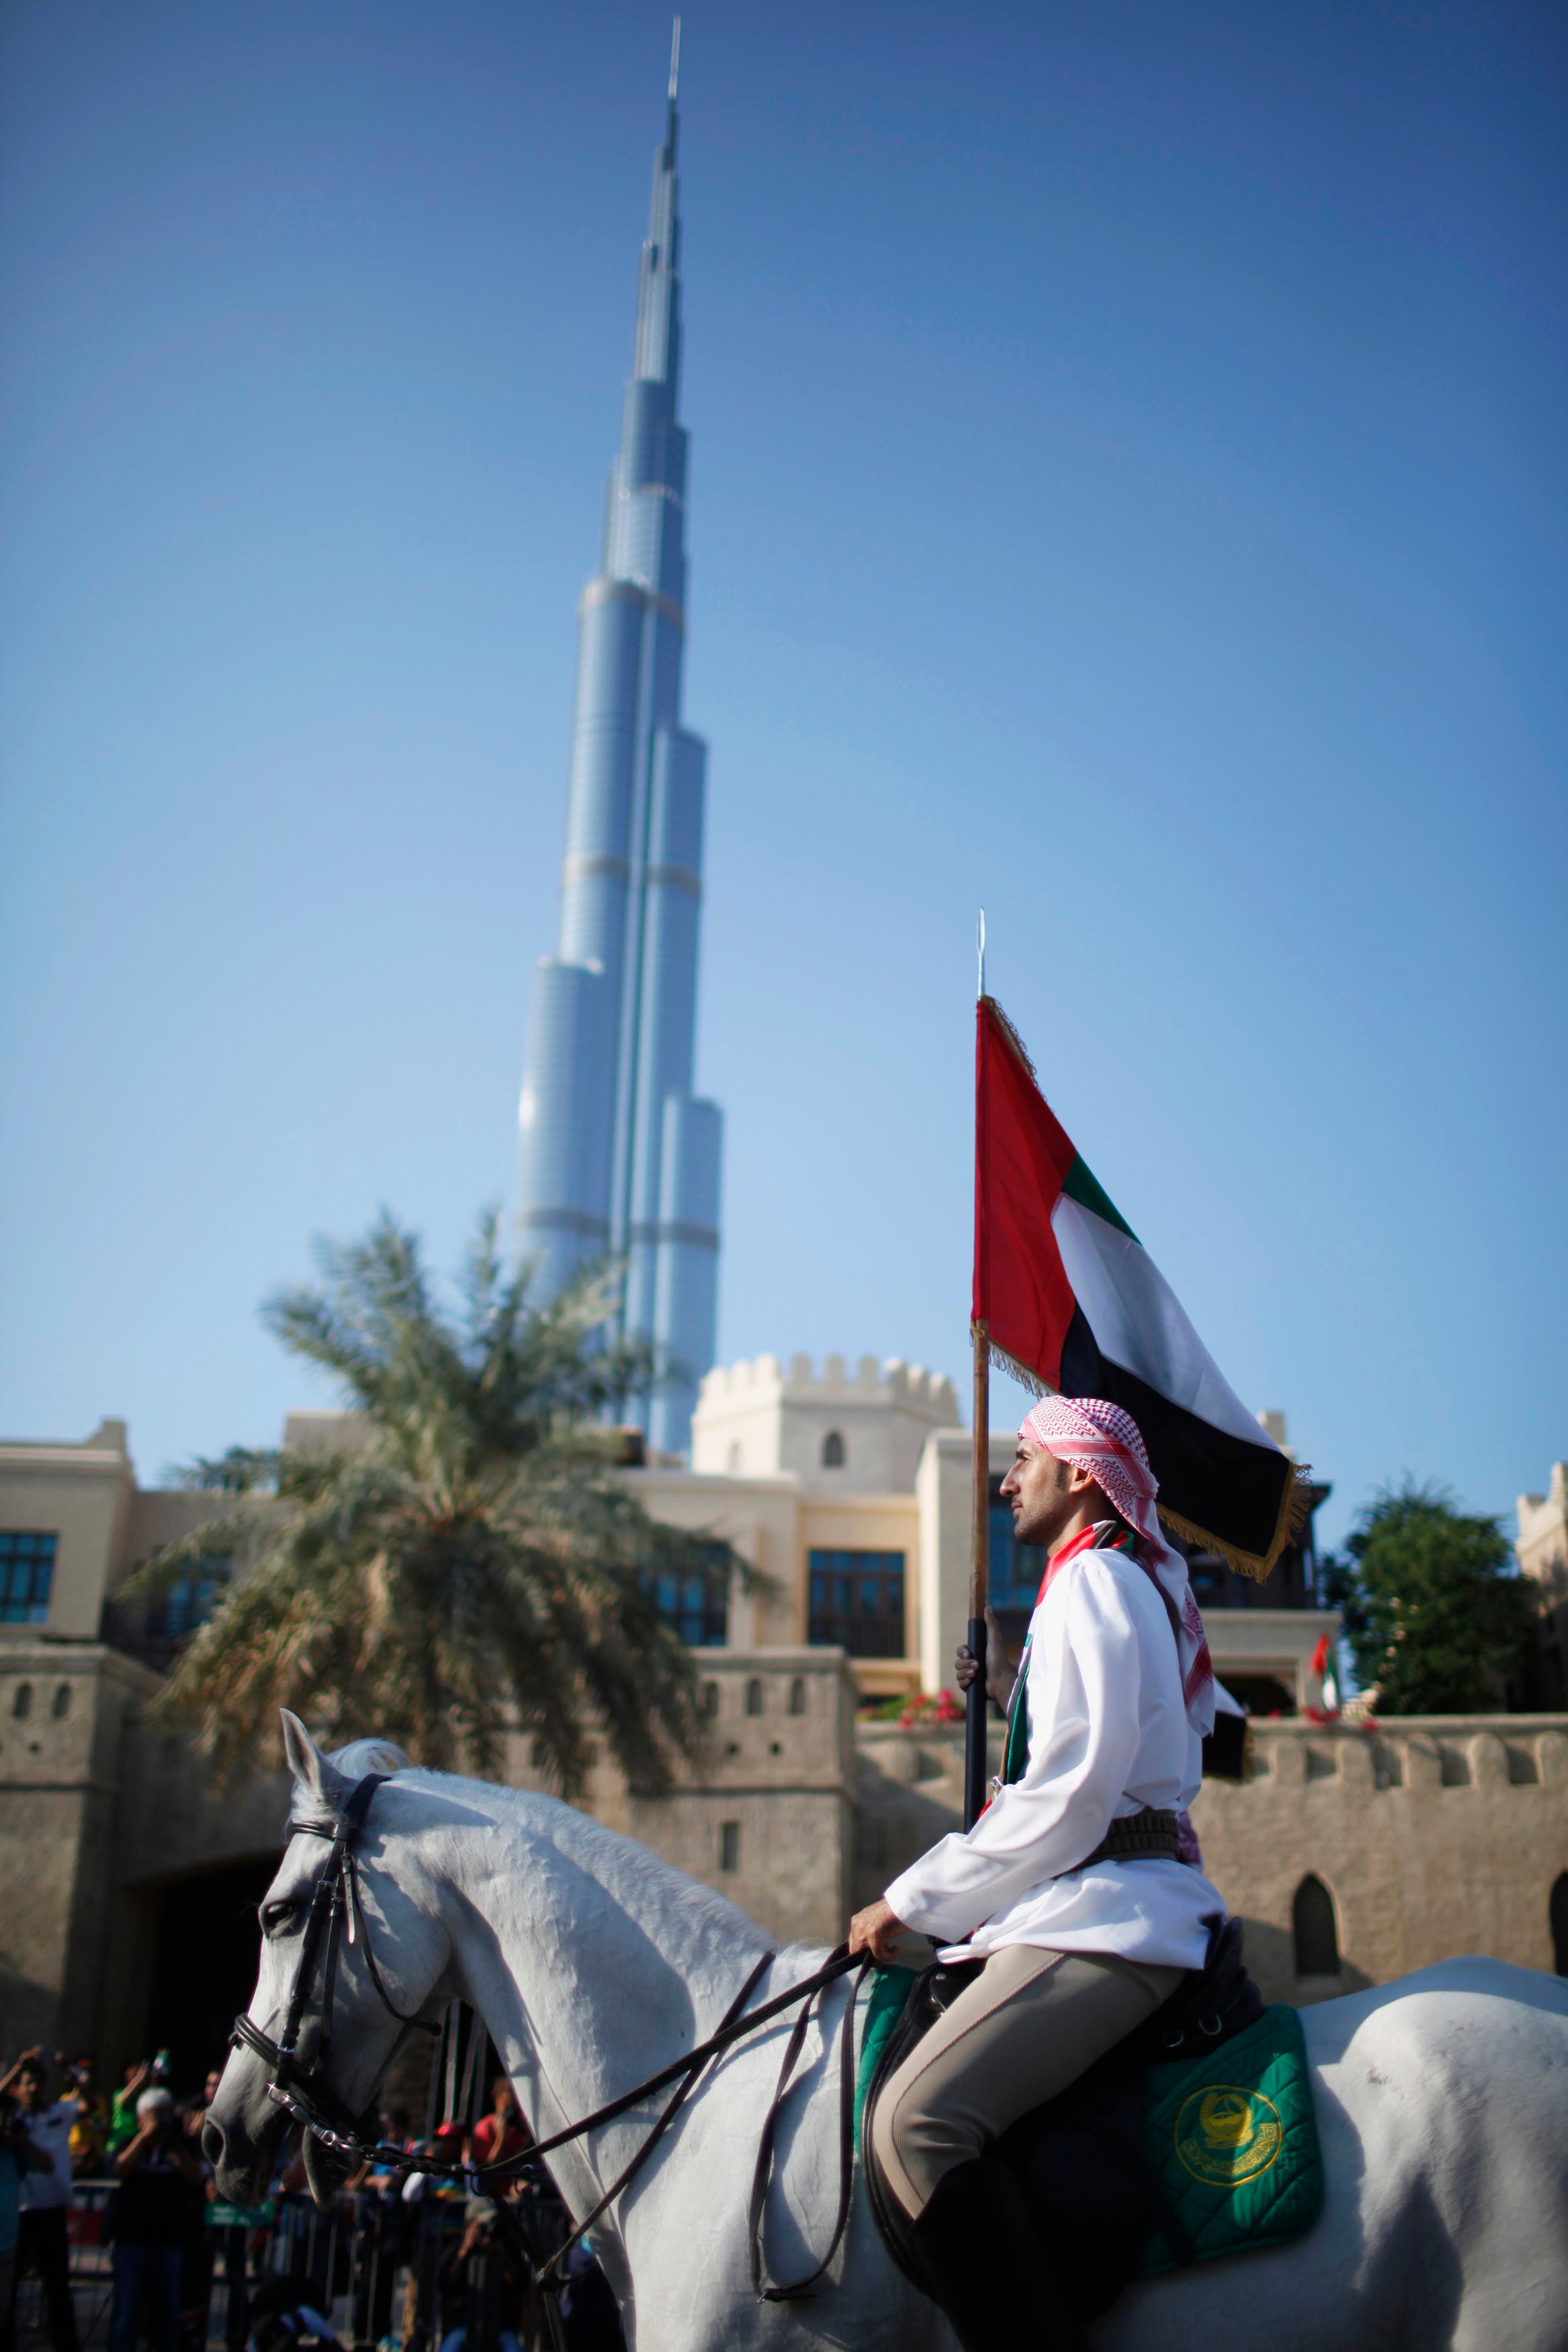 A man holds a national flag as he rides a horse in front of Burj Khalifa during parade celebrating 41st National Day of the United Arab Emirates, in downtown Dubai. (Reuters)